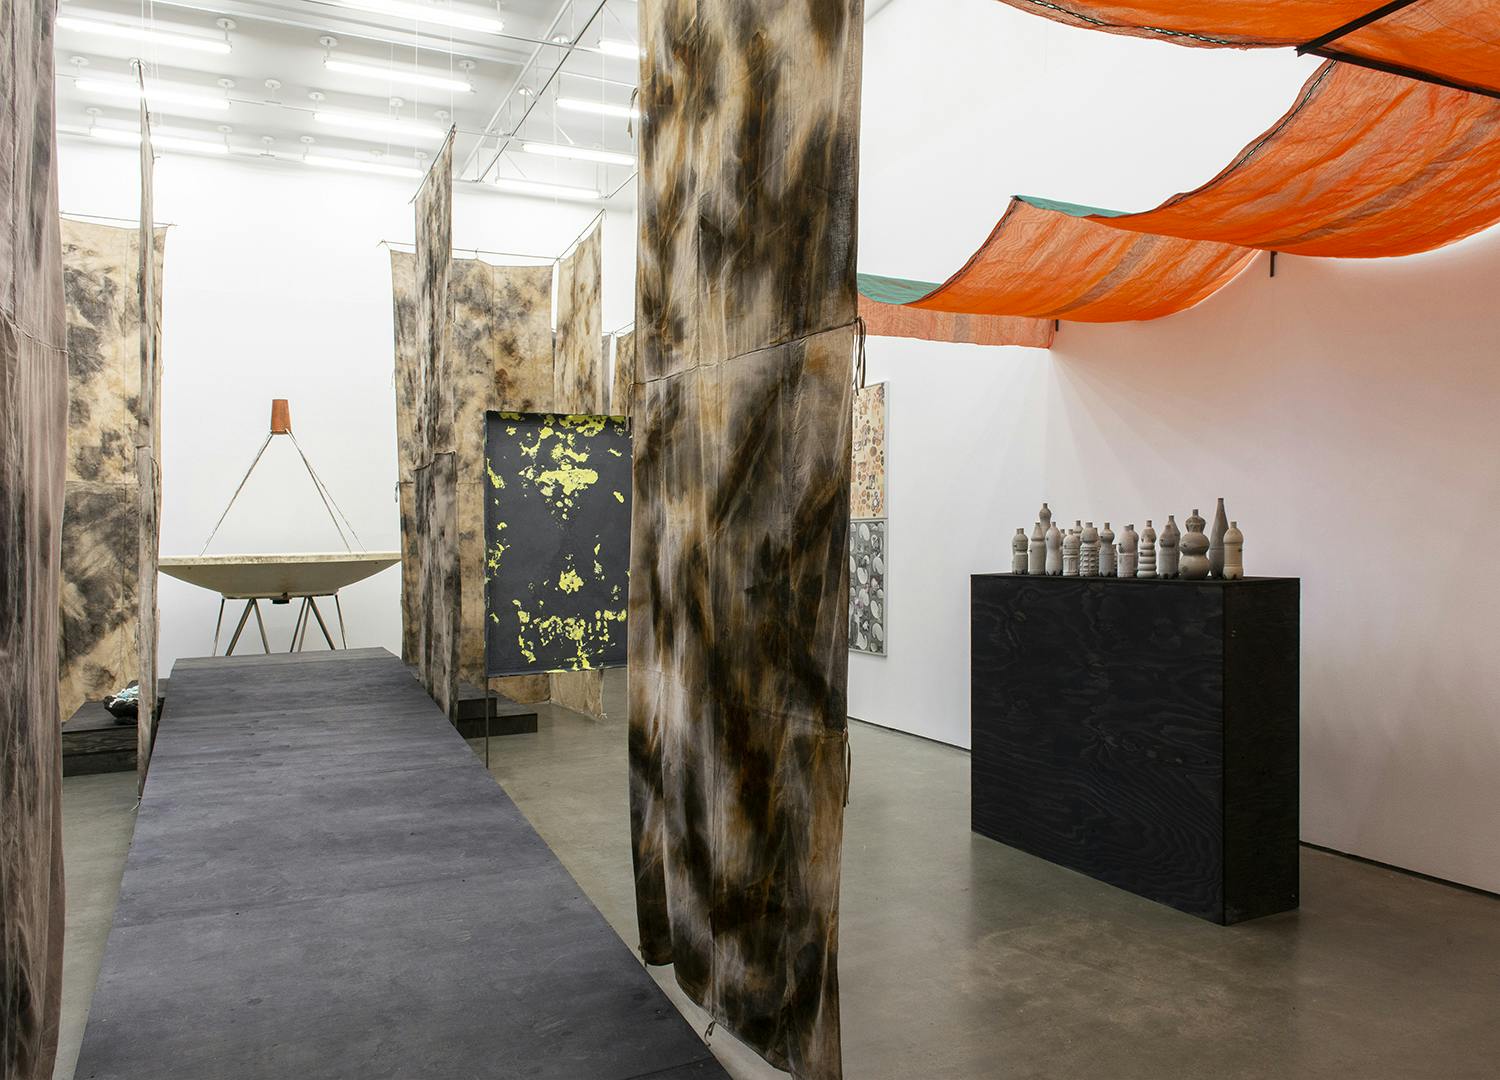 Strips of dyed cloth and orange netting hang throughout the gallery space. To the right a ramp leads to a satellite dish sculpture. On The right side is a black plinth with small sculptures of bottles.